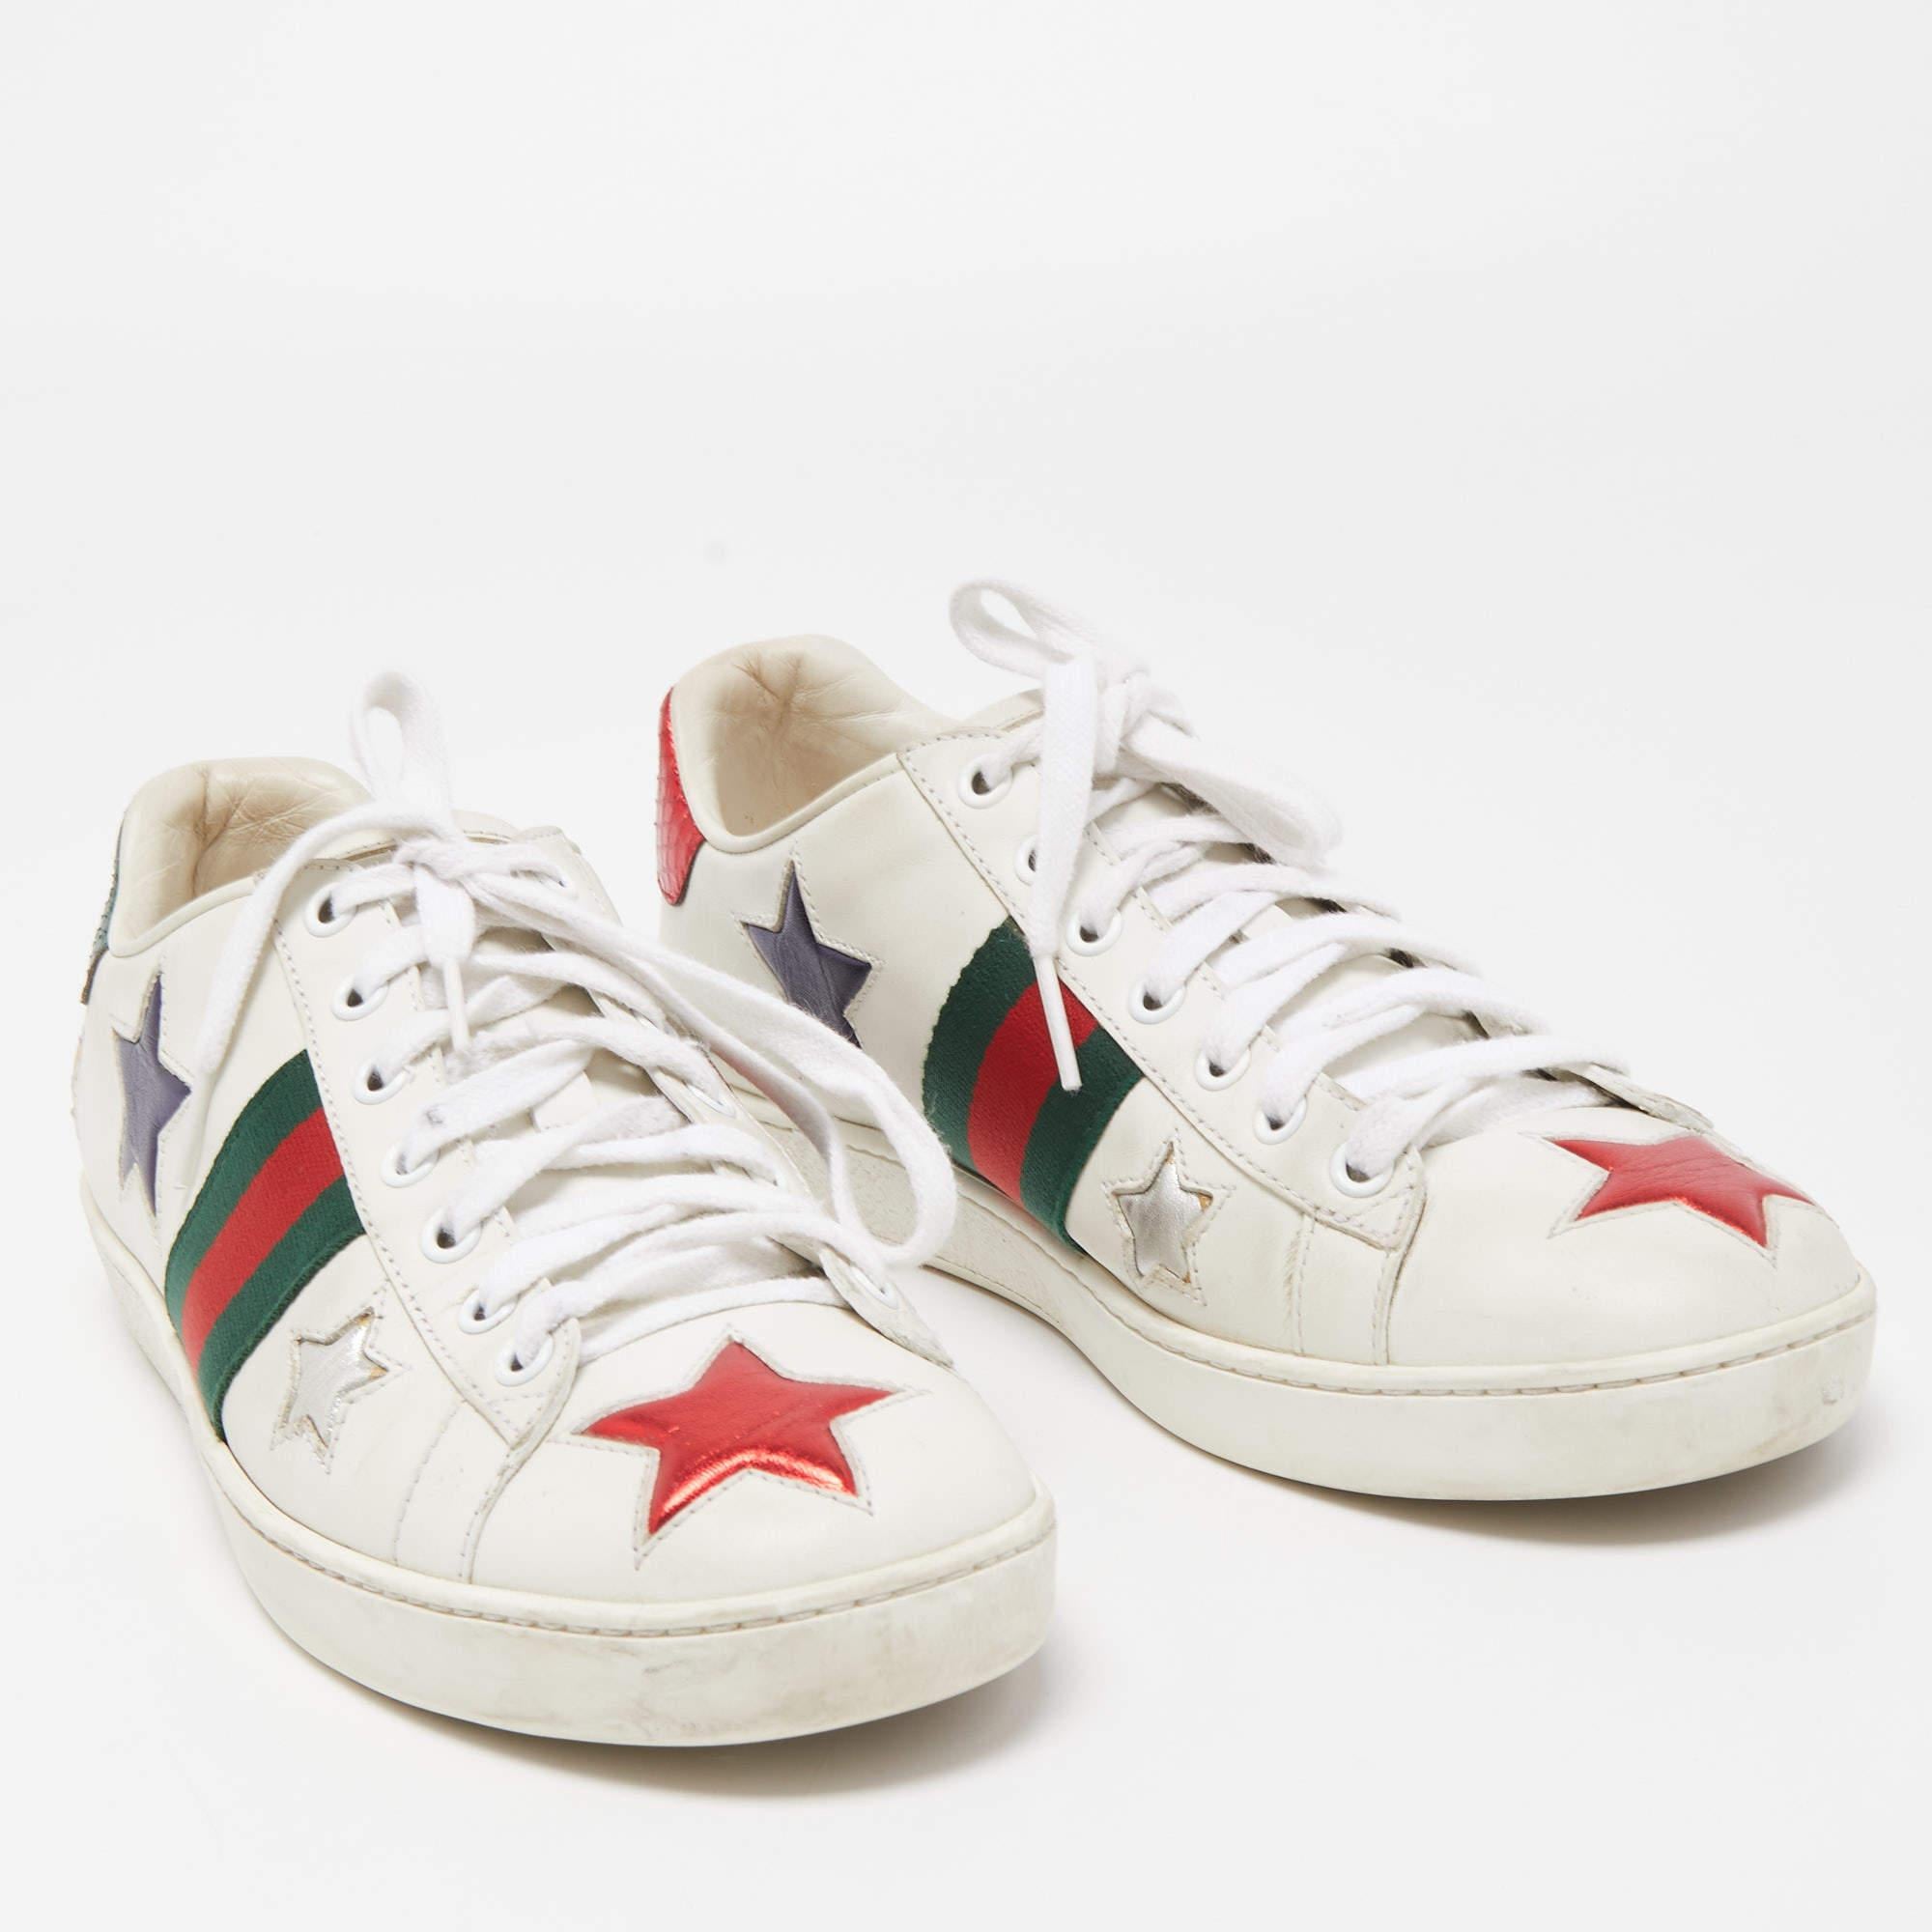 Sneakers are sought-after for reasons like comfort, ease and casual style. These Gucci high tops fit right in as they are stylish and snug. Brimming with fabulous details, these sneakers are crafted from leather into a high-top silhouette and